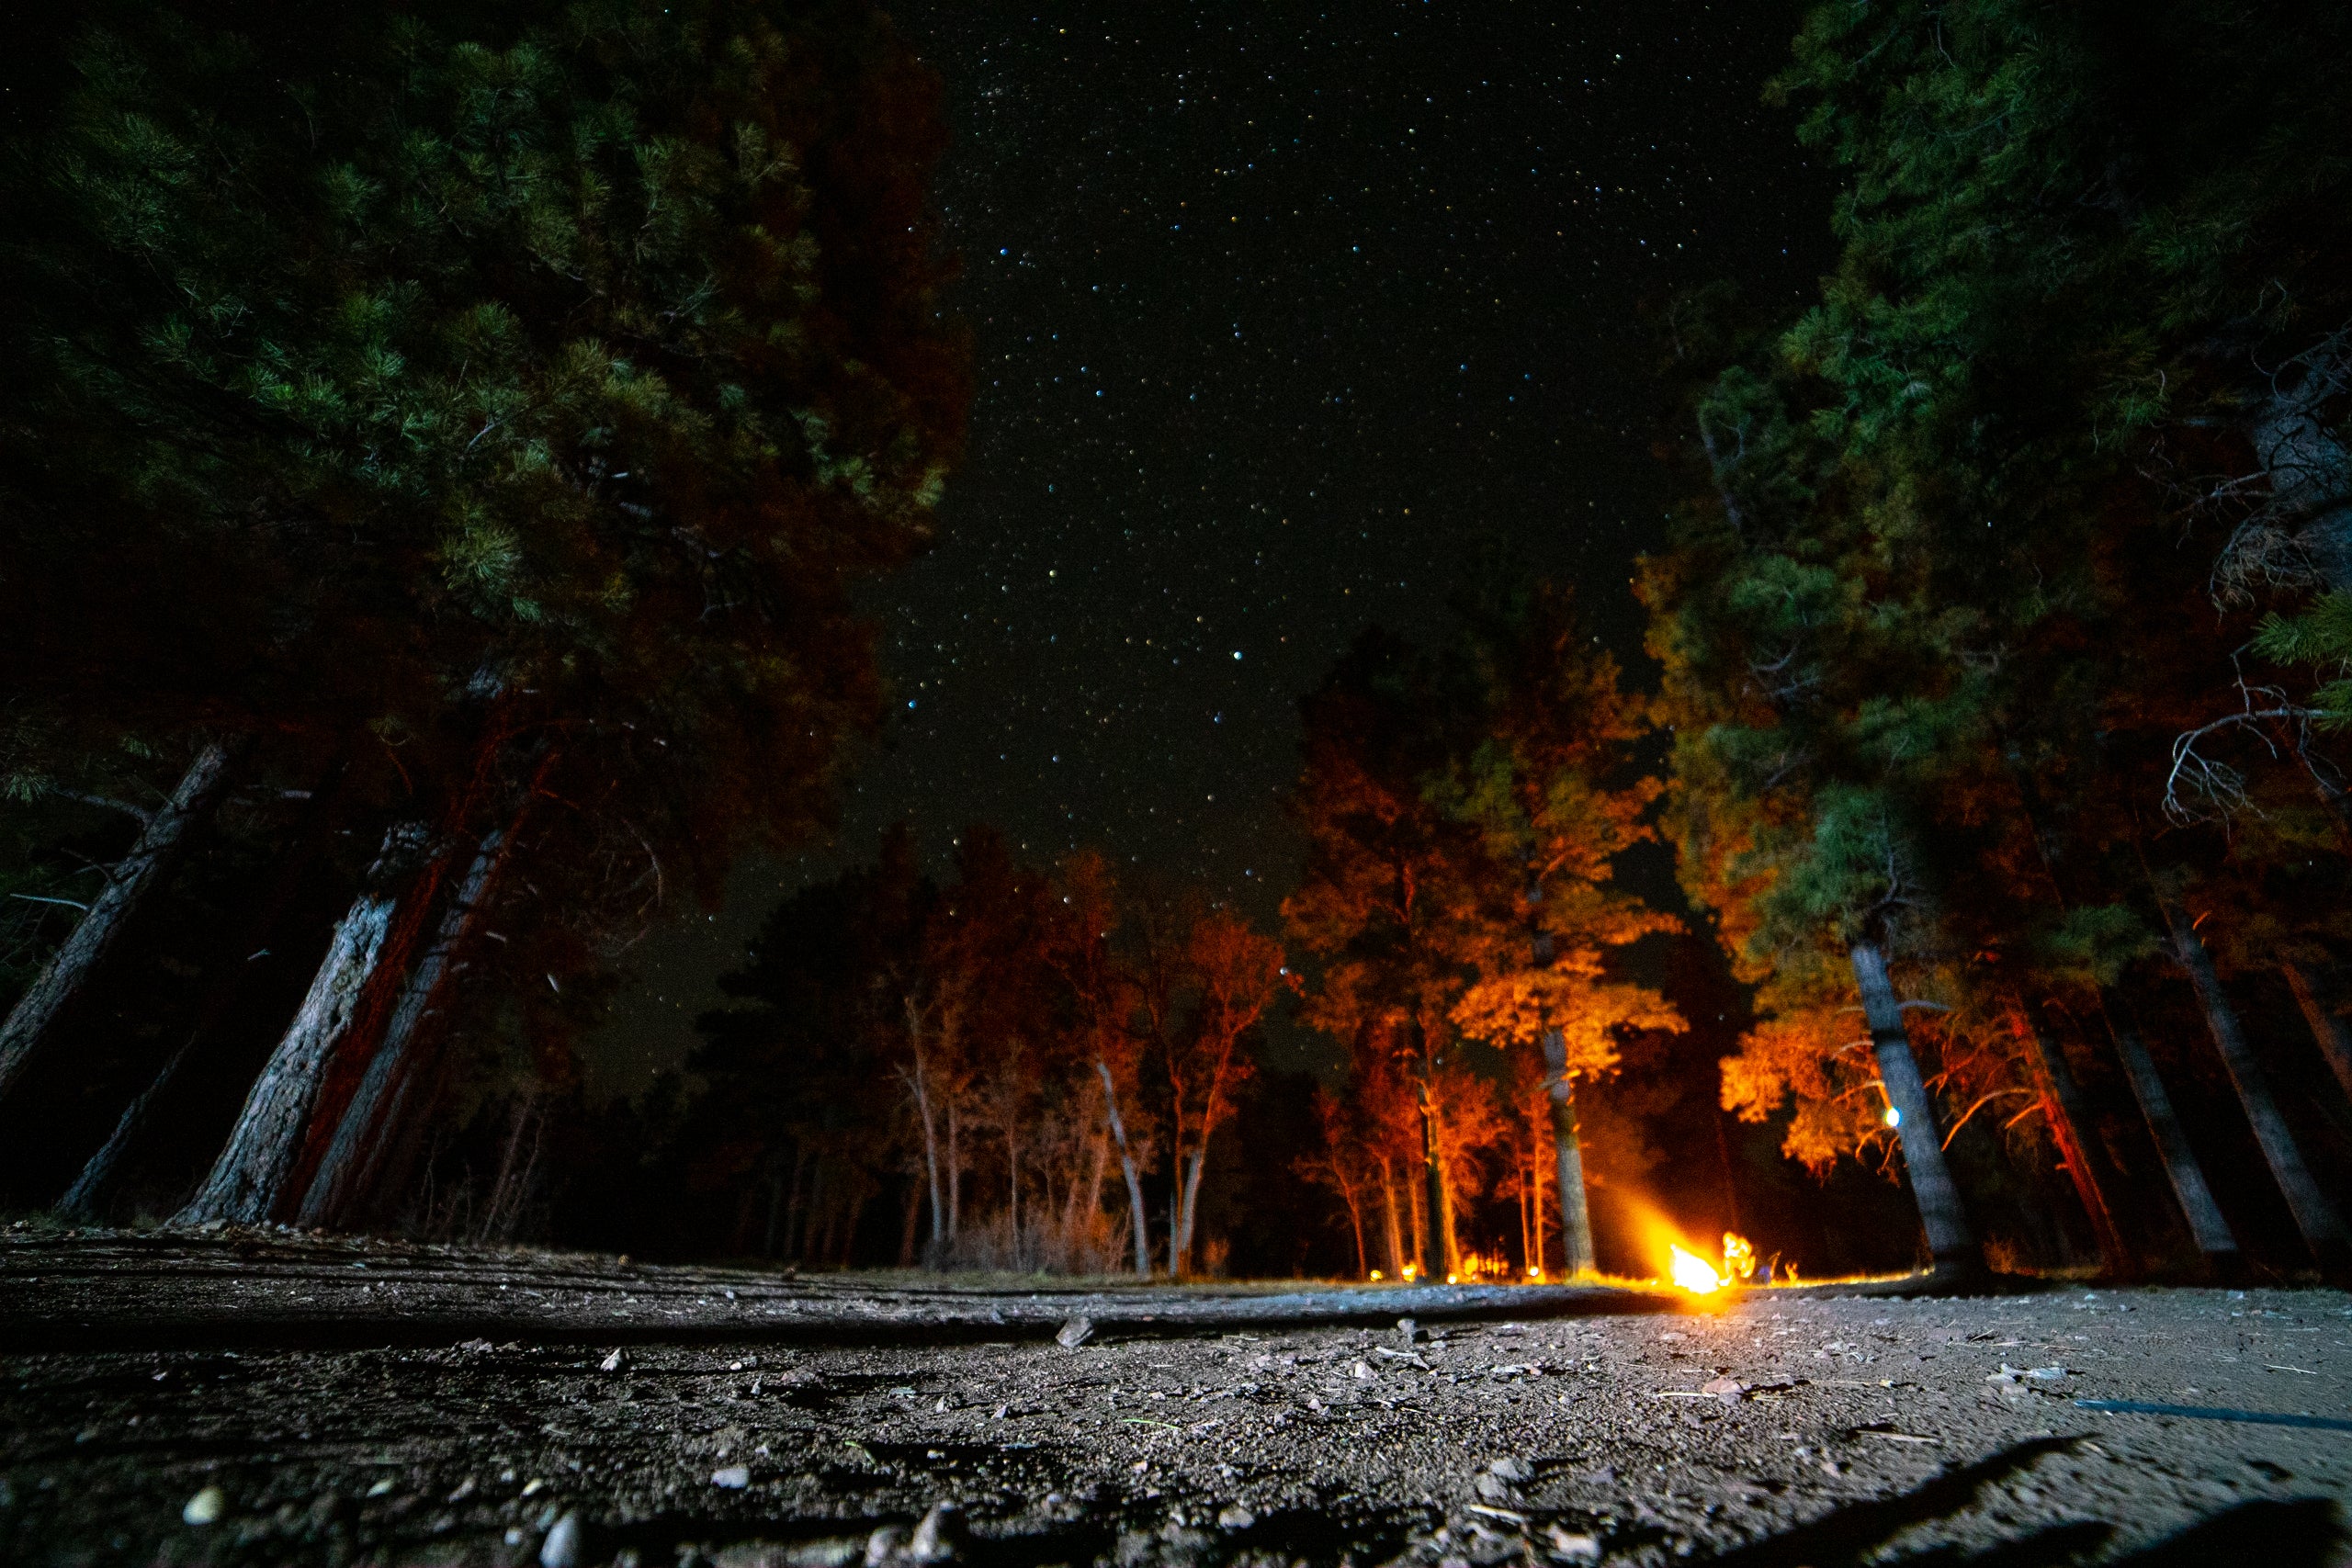 A campfire in Kaibab National Forest.